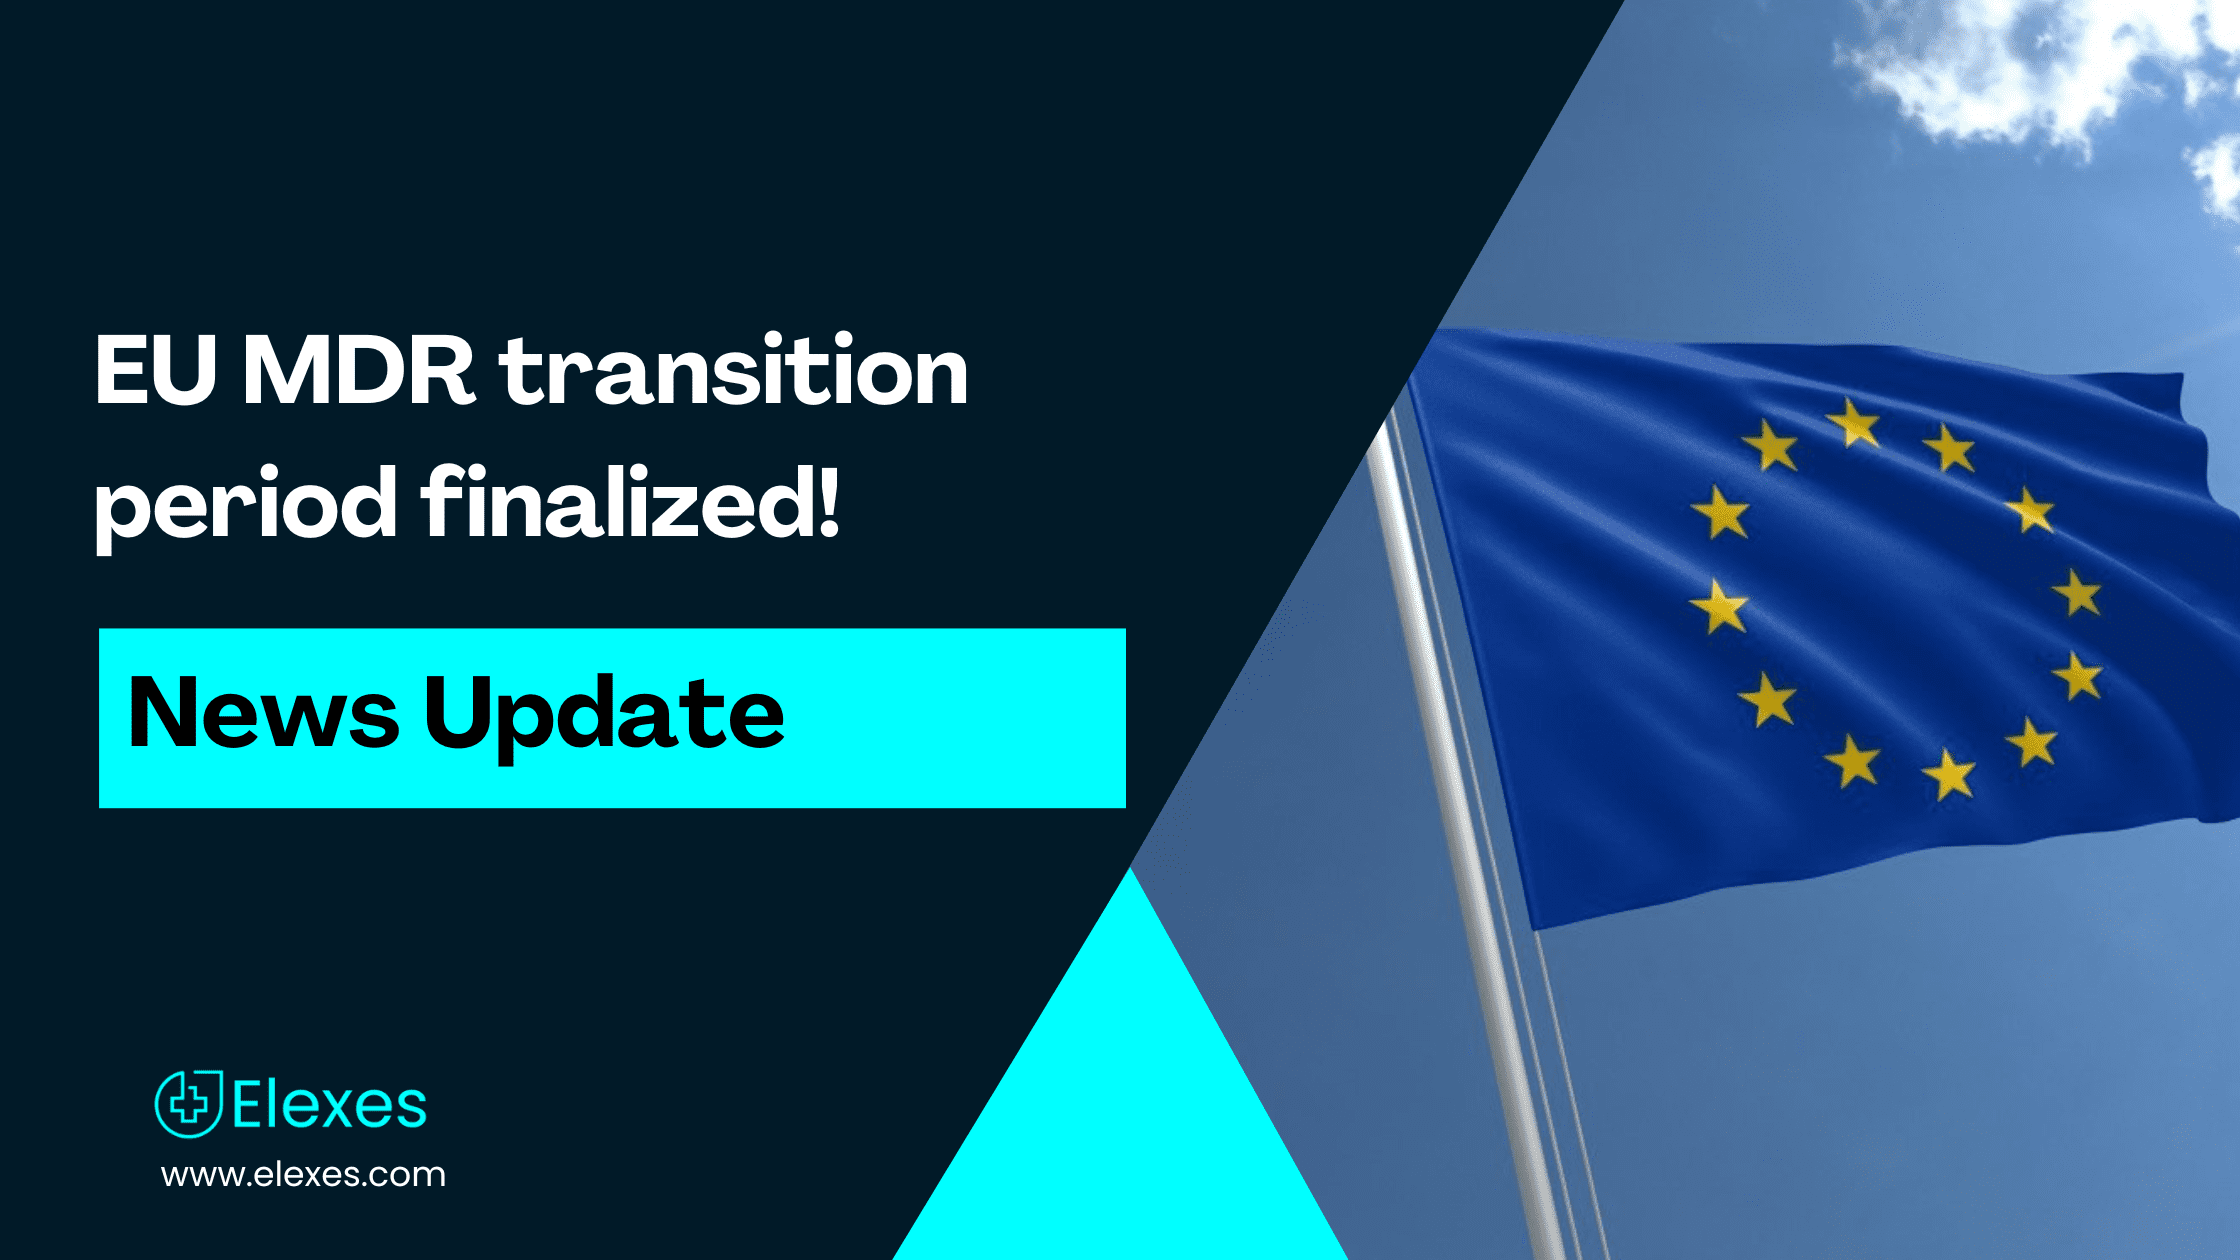 Extension to EU MDR transition period finalized!